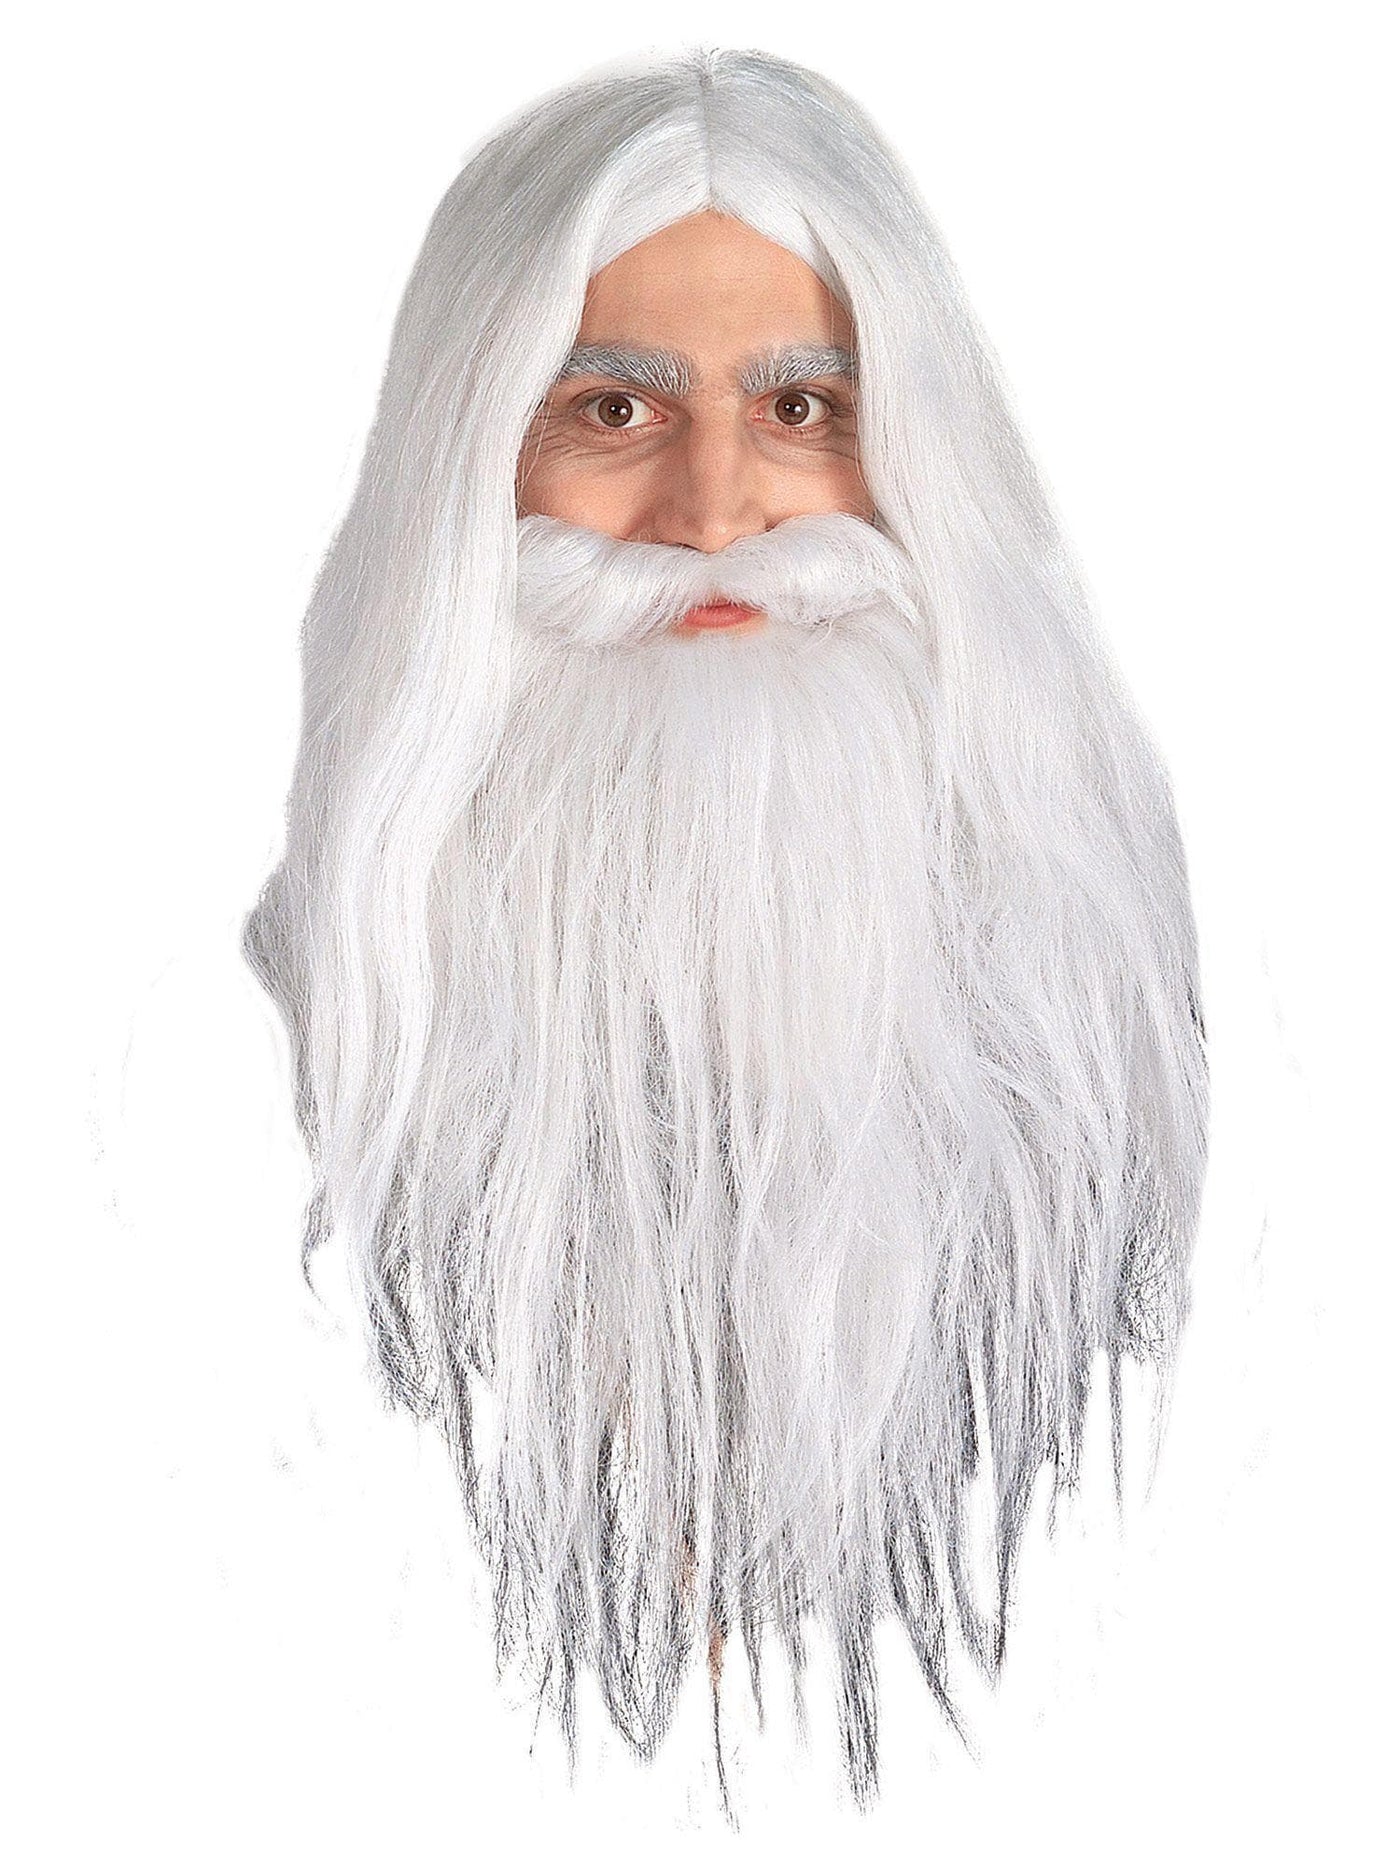 The Lord of the Rings Gandalf Beard and Wig Set for Adults